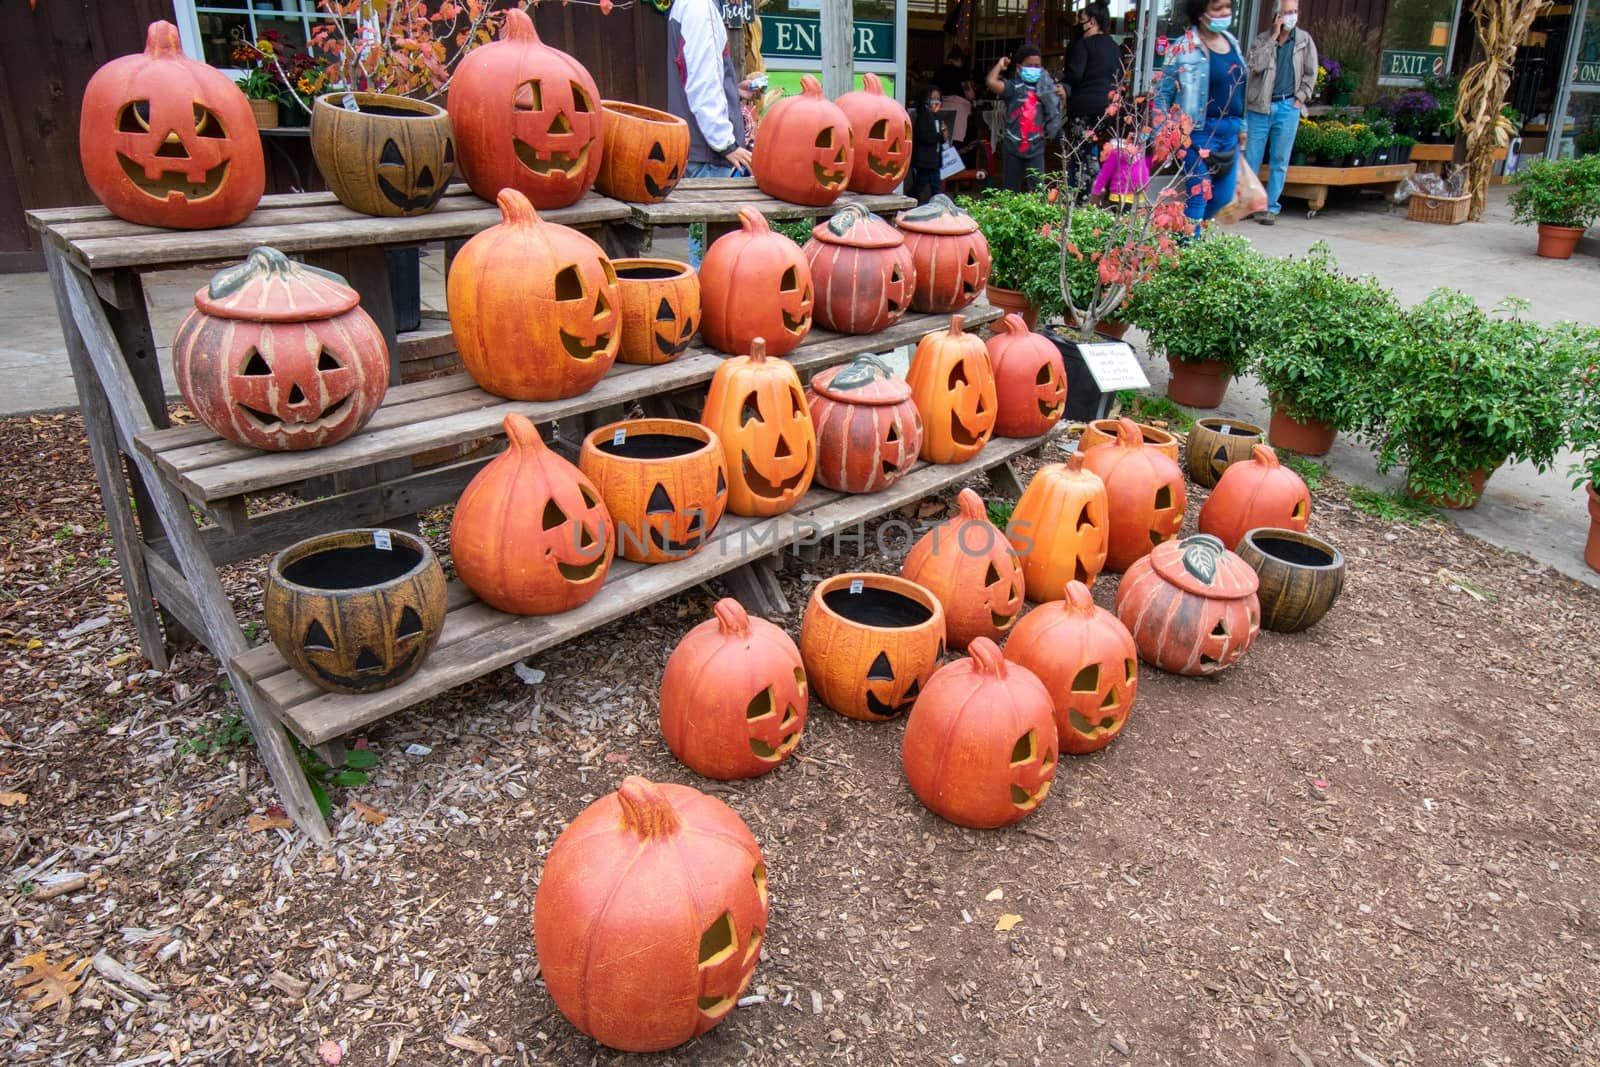 A Bunch of Ceramic Jack O' Lanterns on a Wooden Shelf in a Bed of Mulch Out Front of a Farmer's Market